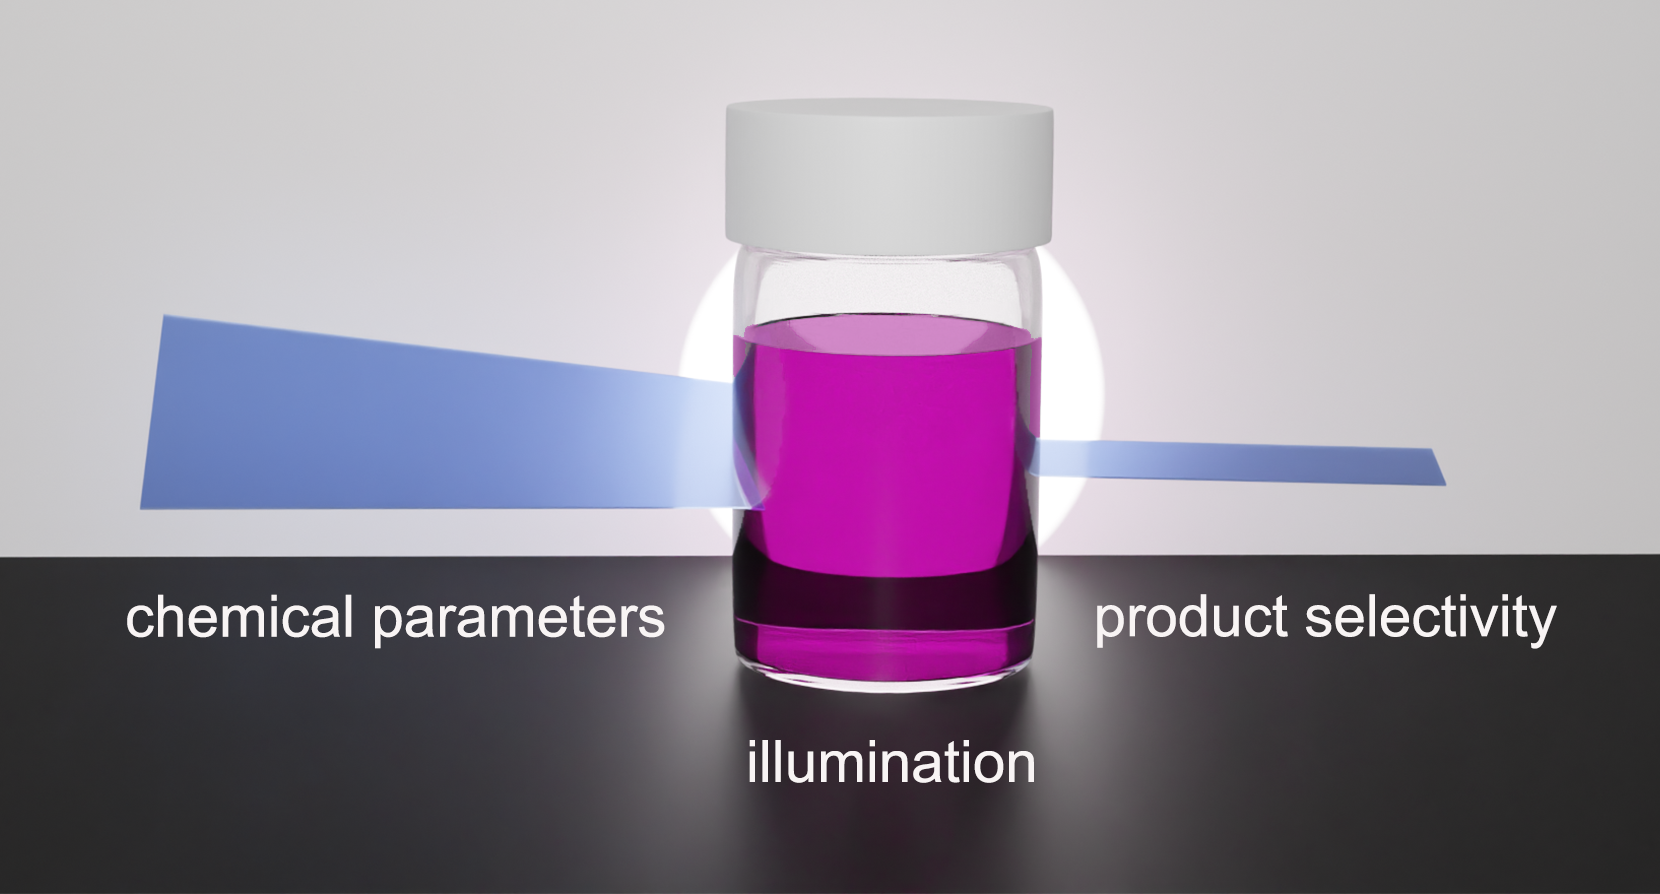 A glass vial with a pink liquid is shown in the center, and is being illuminated from the direction of the viewer's perspective with light. A thick wedge labeled "chemical parameters" is shown entering the vial from the left, and a thinner line labeled "product selectivity" exits from the right side of the vial.